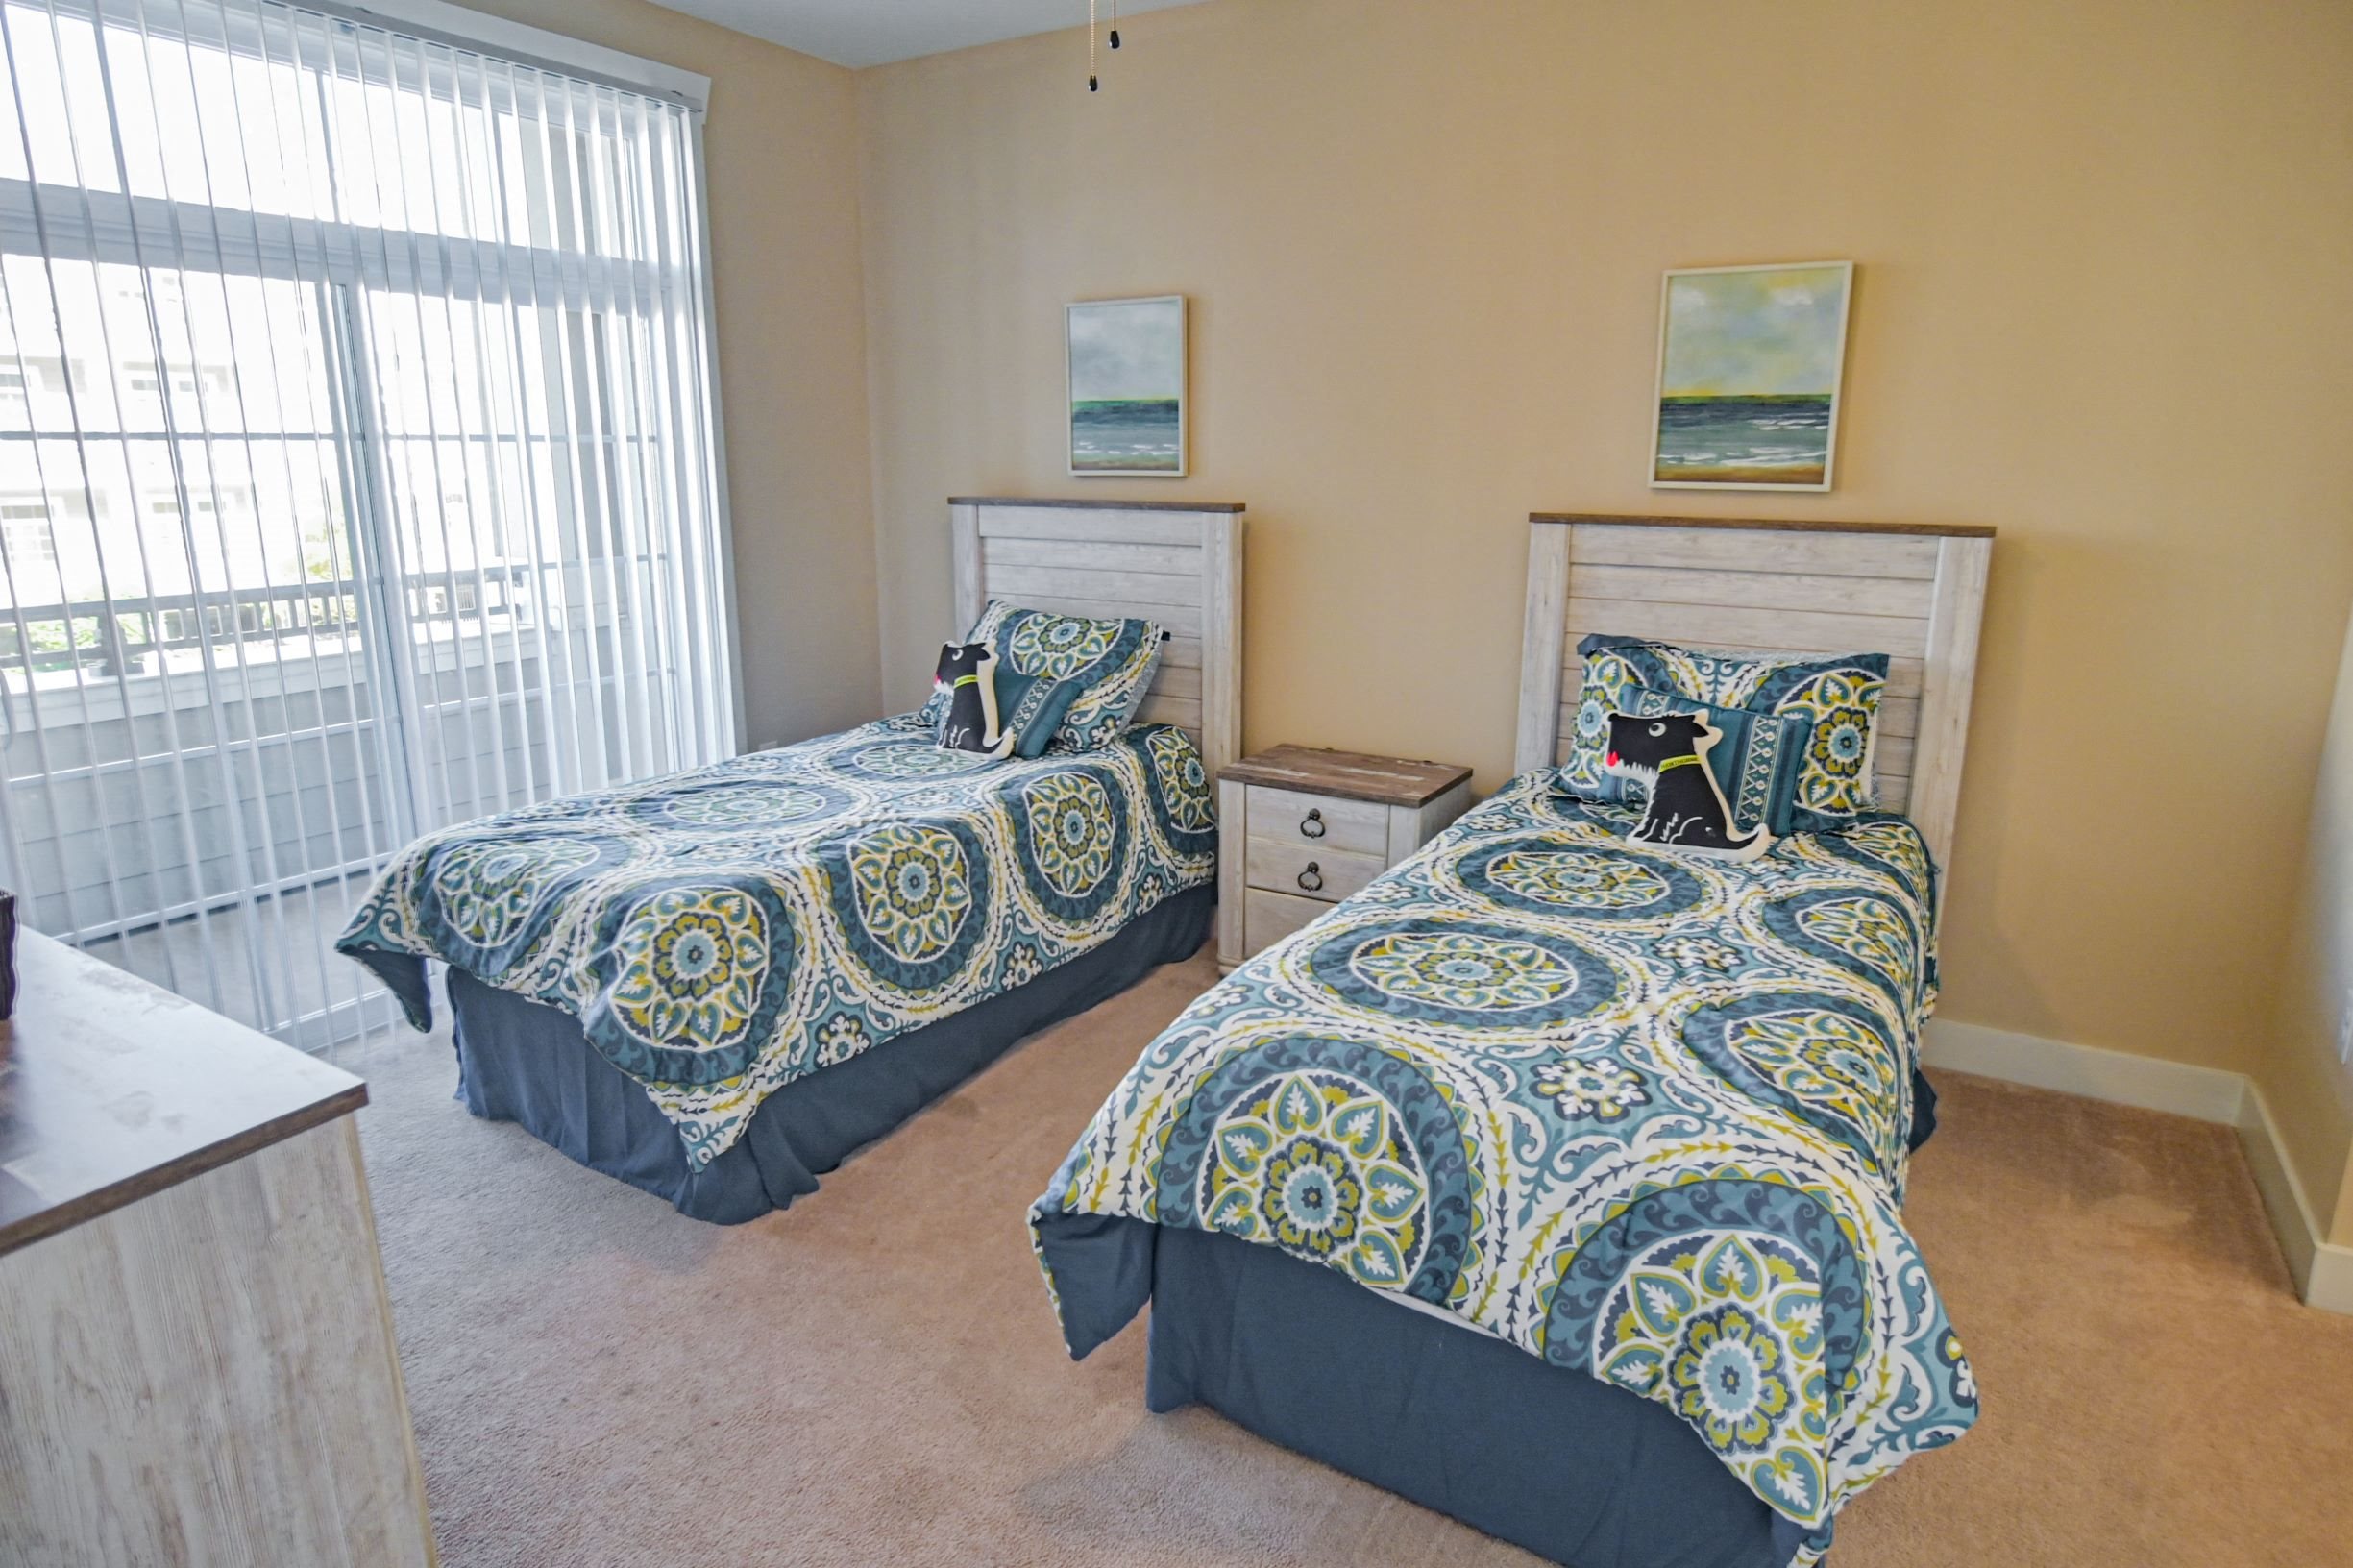 Bedroom at Grand View Luxury Apartments in Wilmington, NC